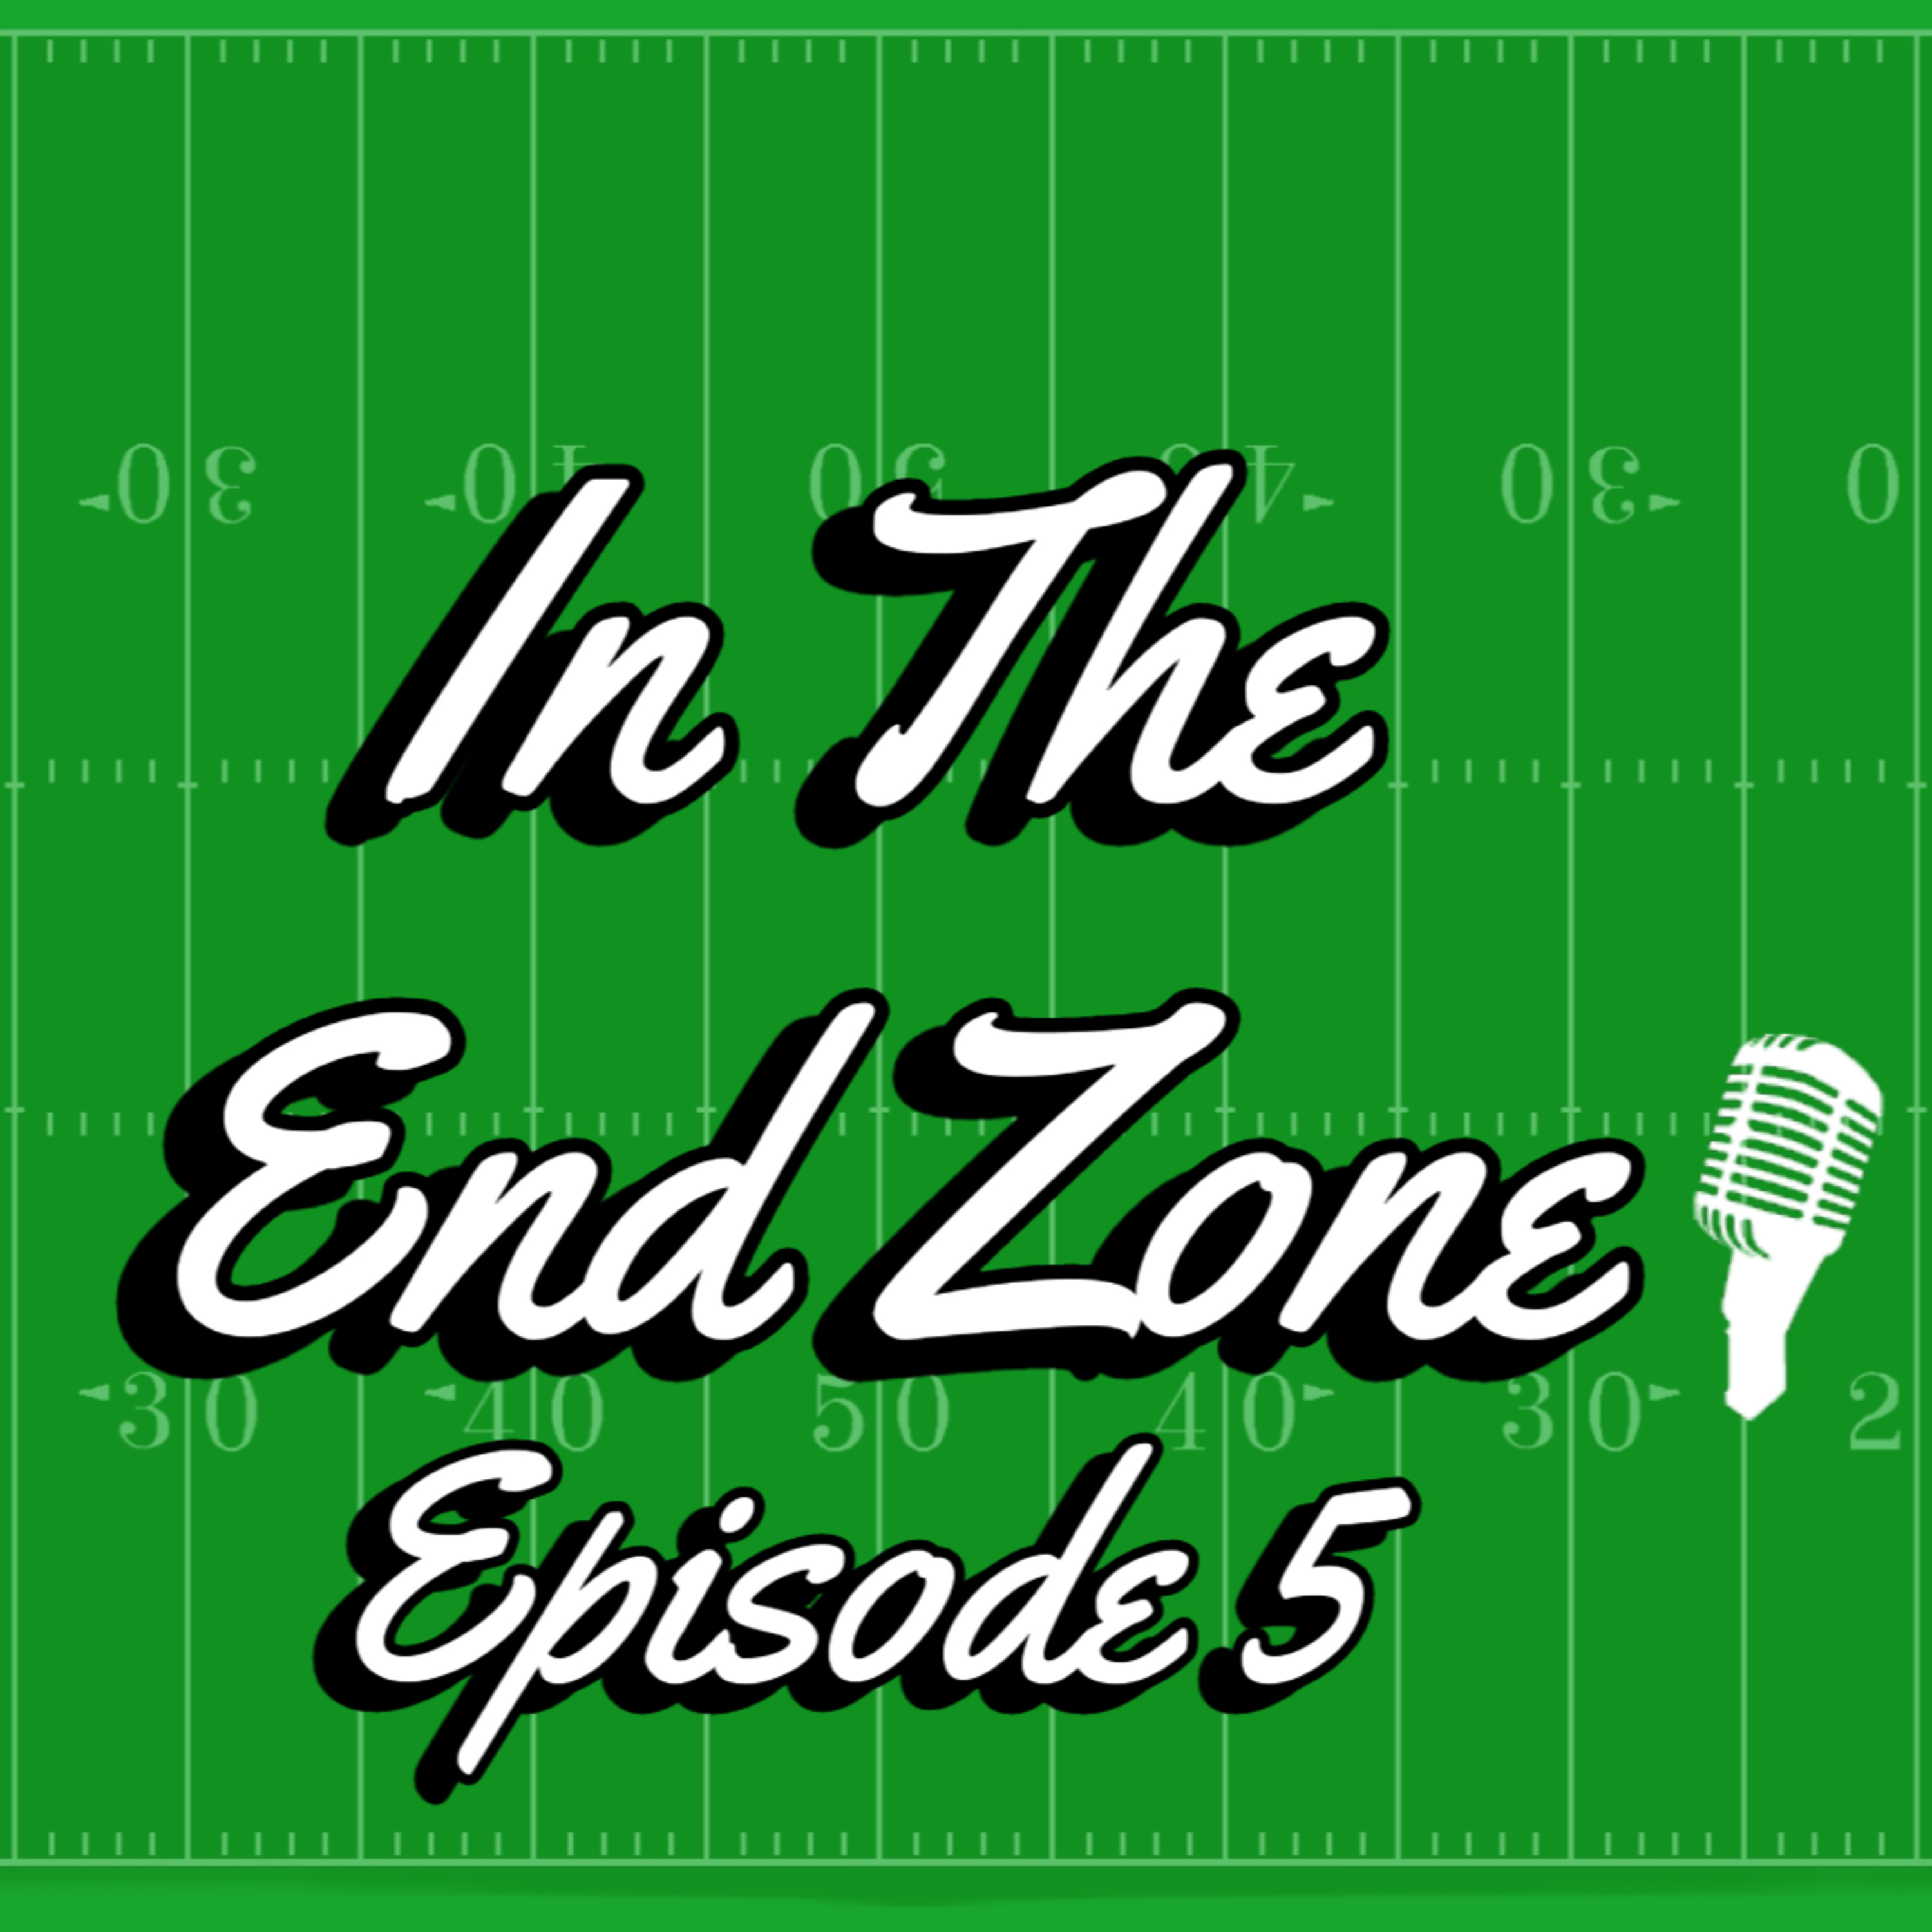 In the EndZone Episode 5: Special Guest Izaac Guerrero